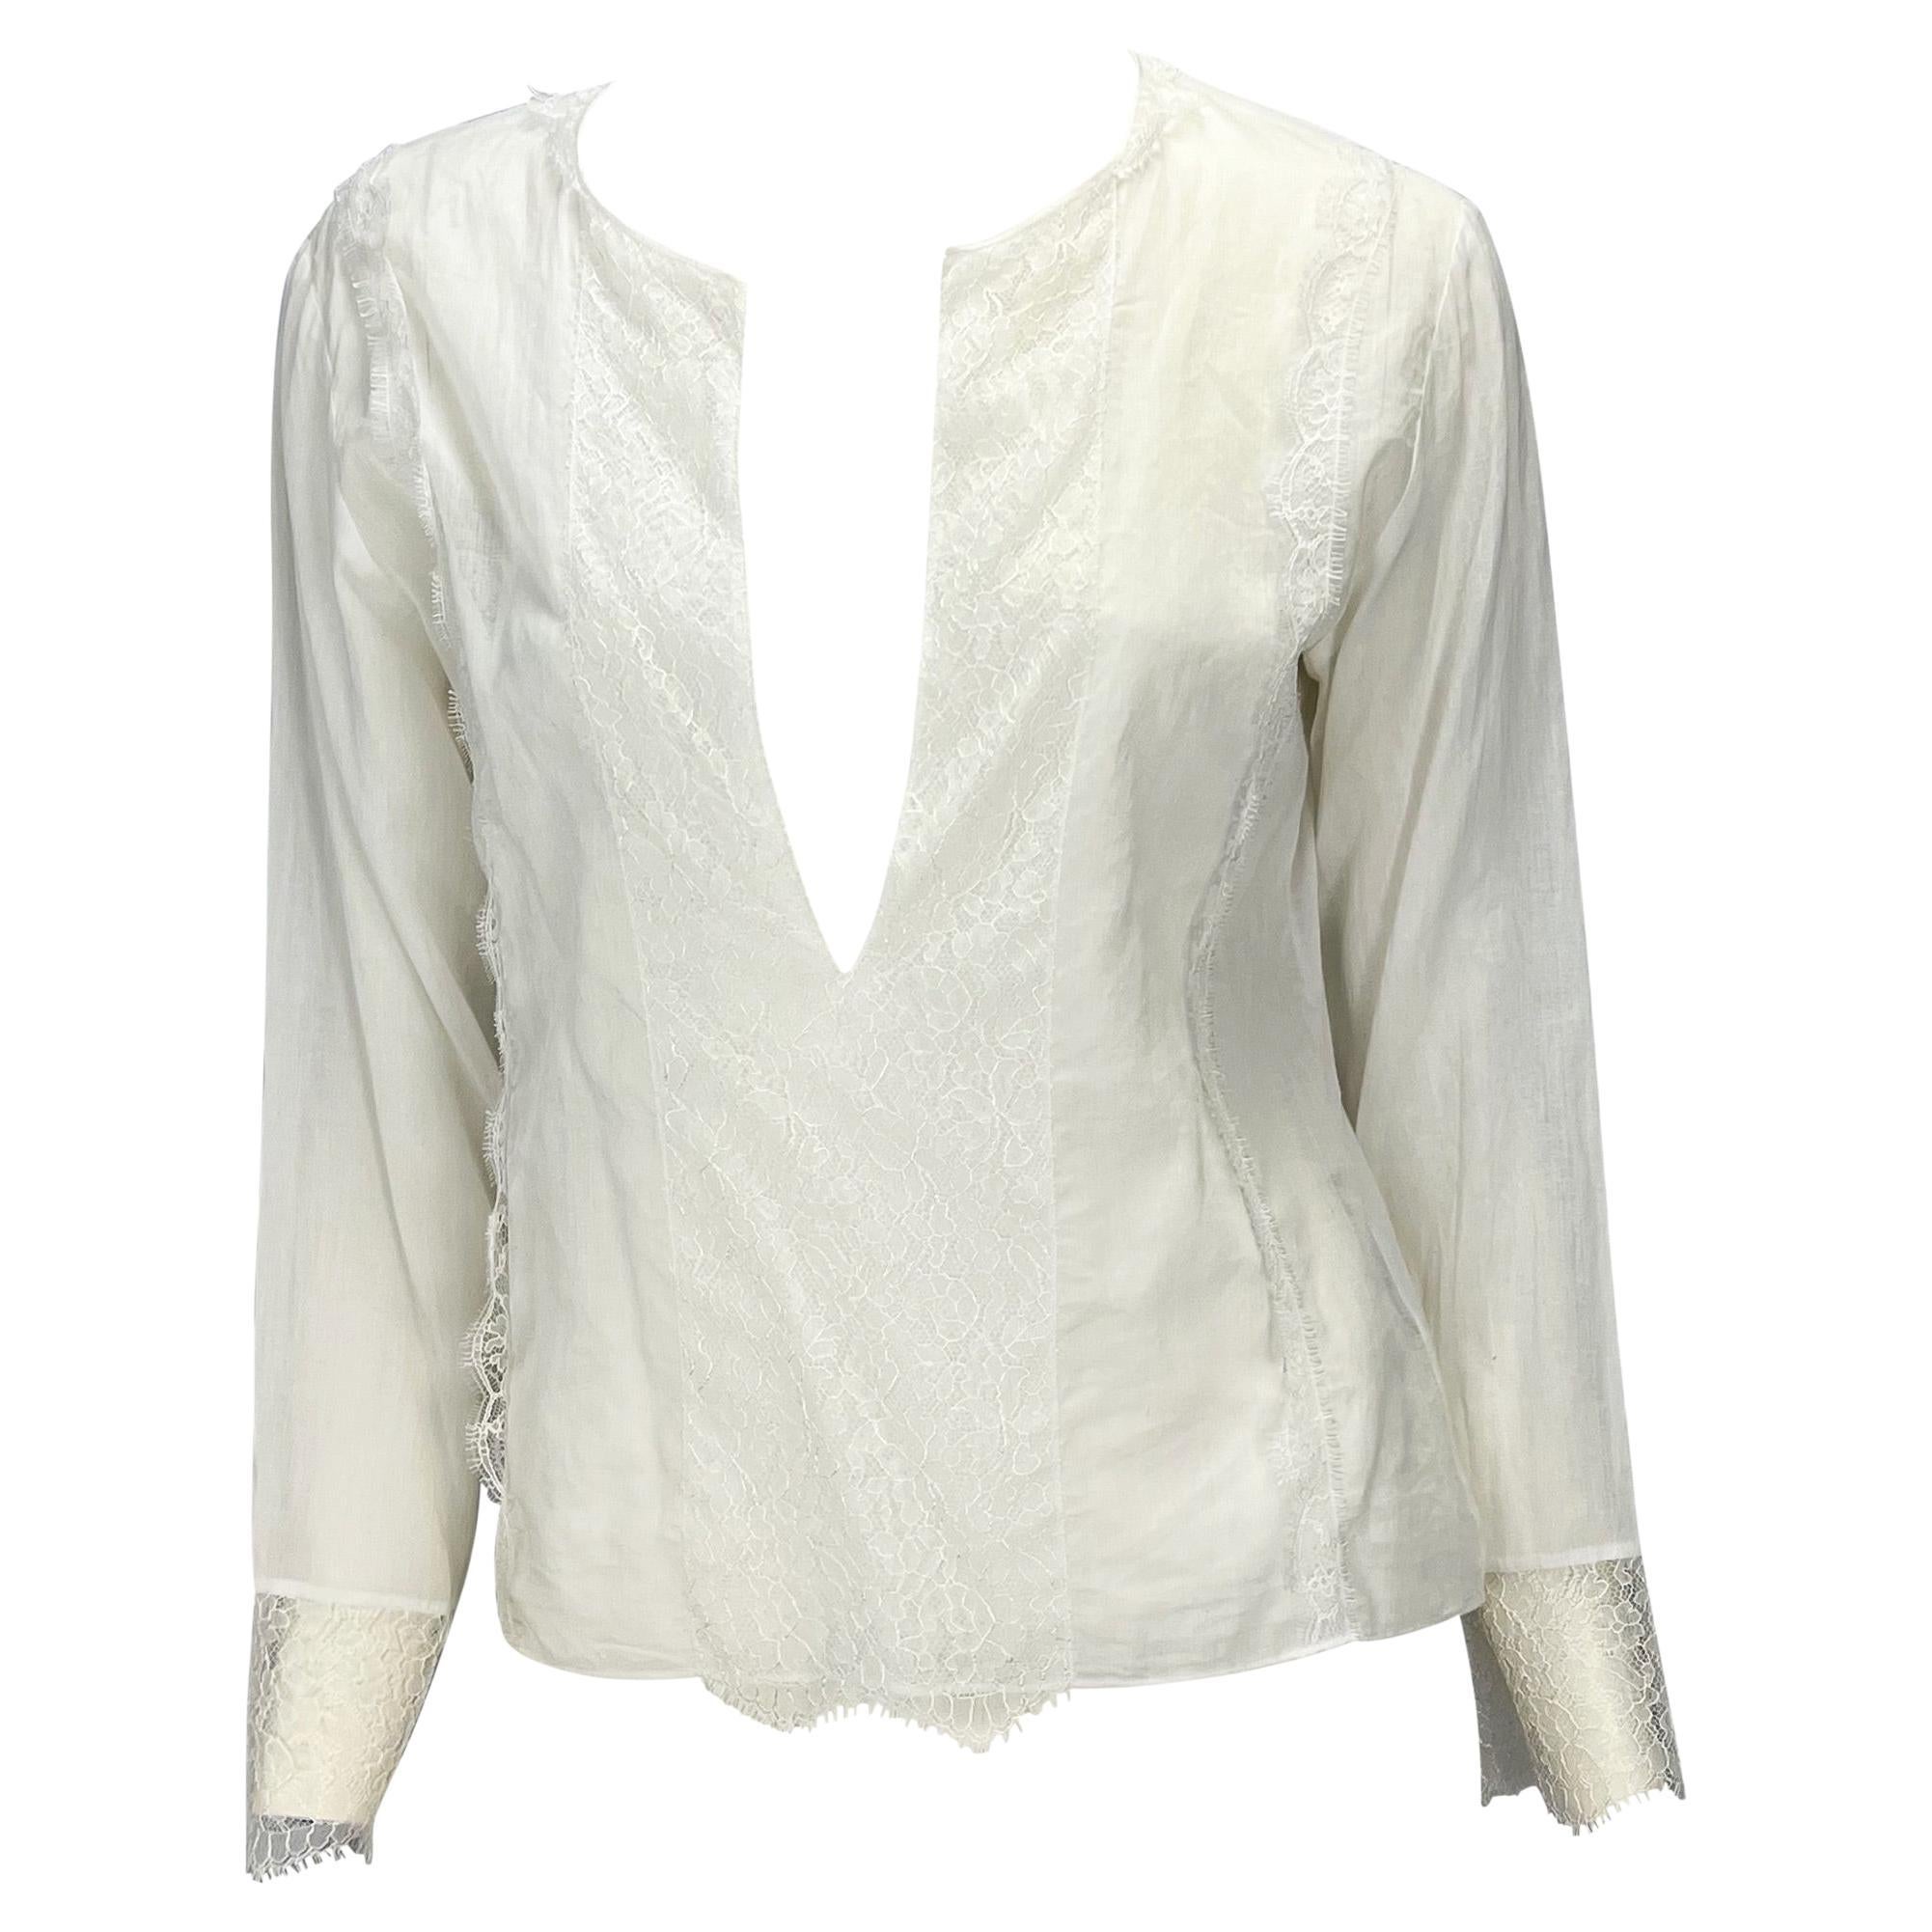 S/S 2000 Gucci by Tom Ford White Sheer Lace Appliqué Tunic Top